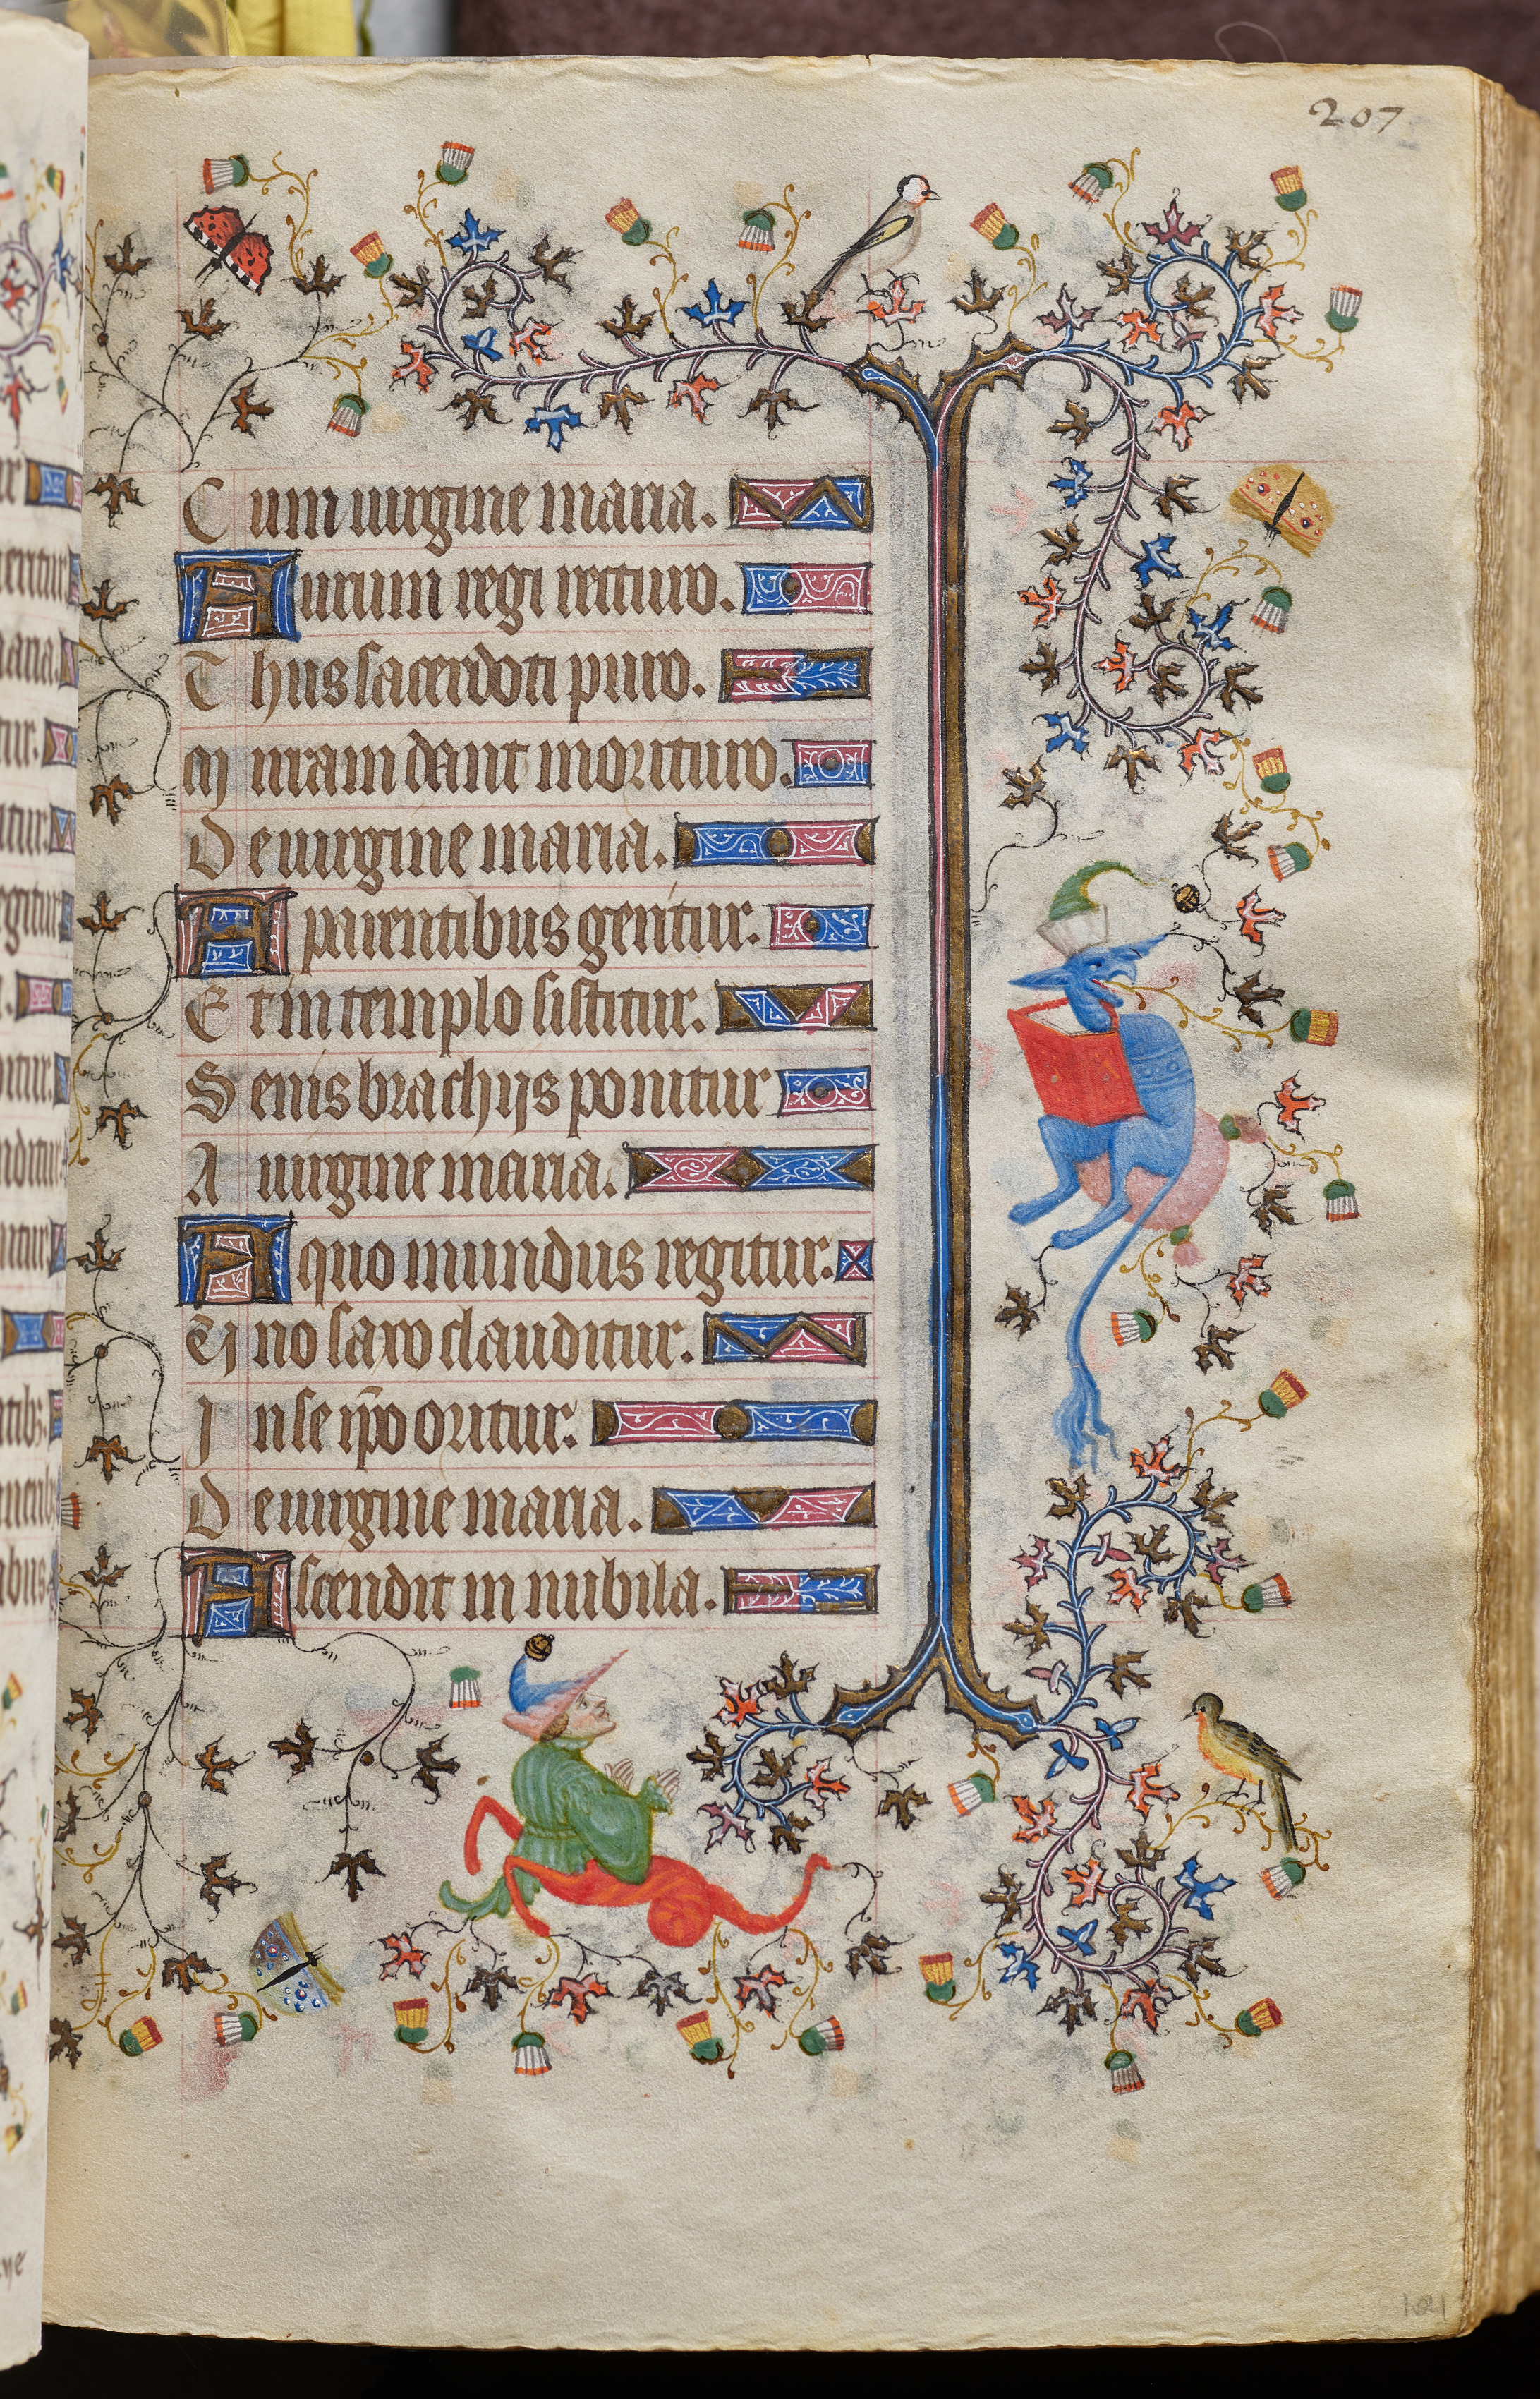 Hours of Charles the Noble, King of Navarre (1361-1425): fol. 104r, Text